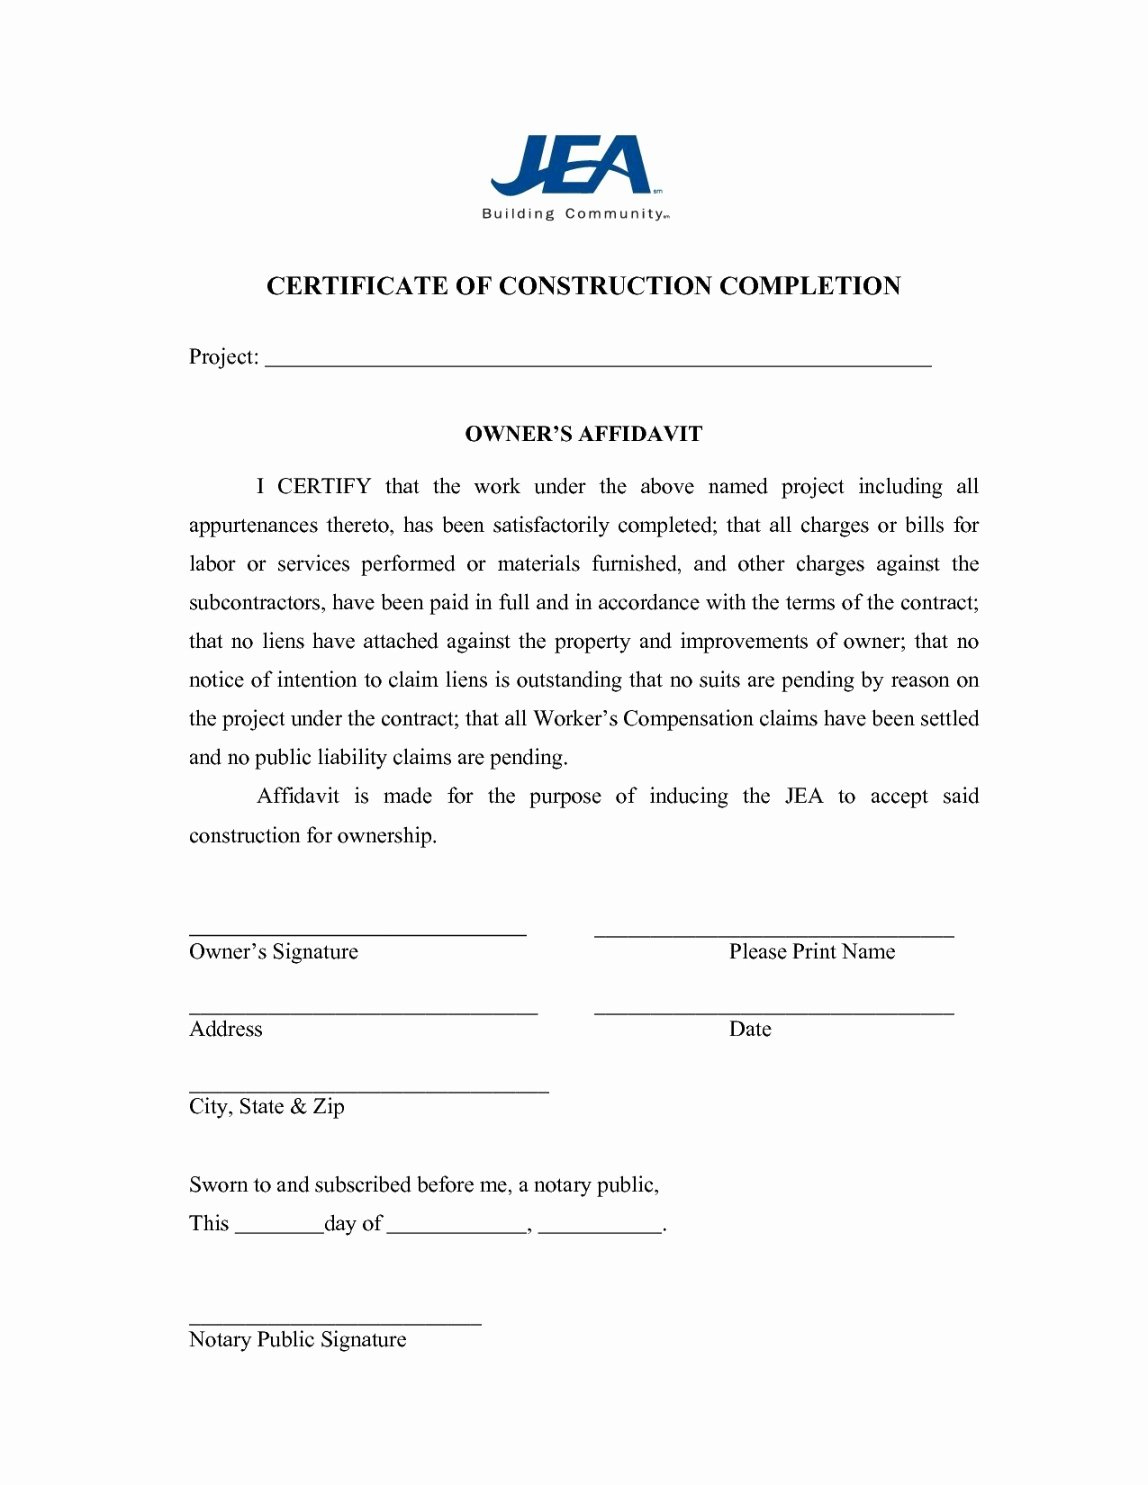 20 Construction Certificate Of Completion Template within Printable Certificate Of Completion Template Construction